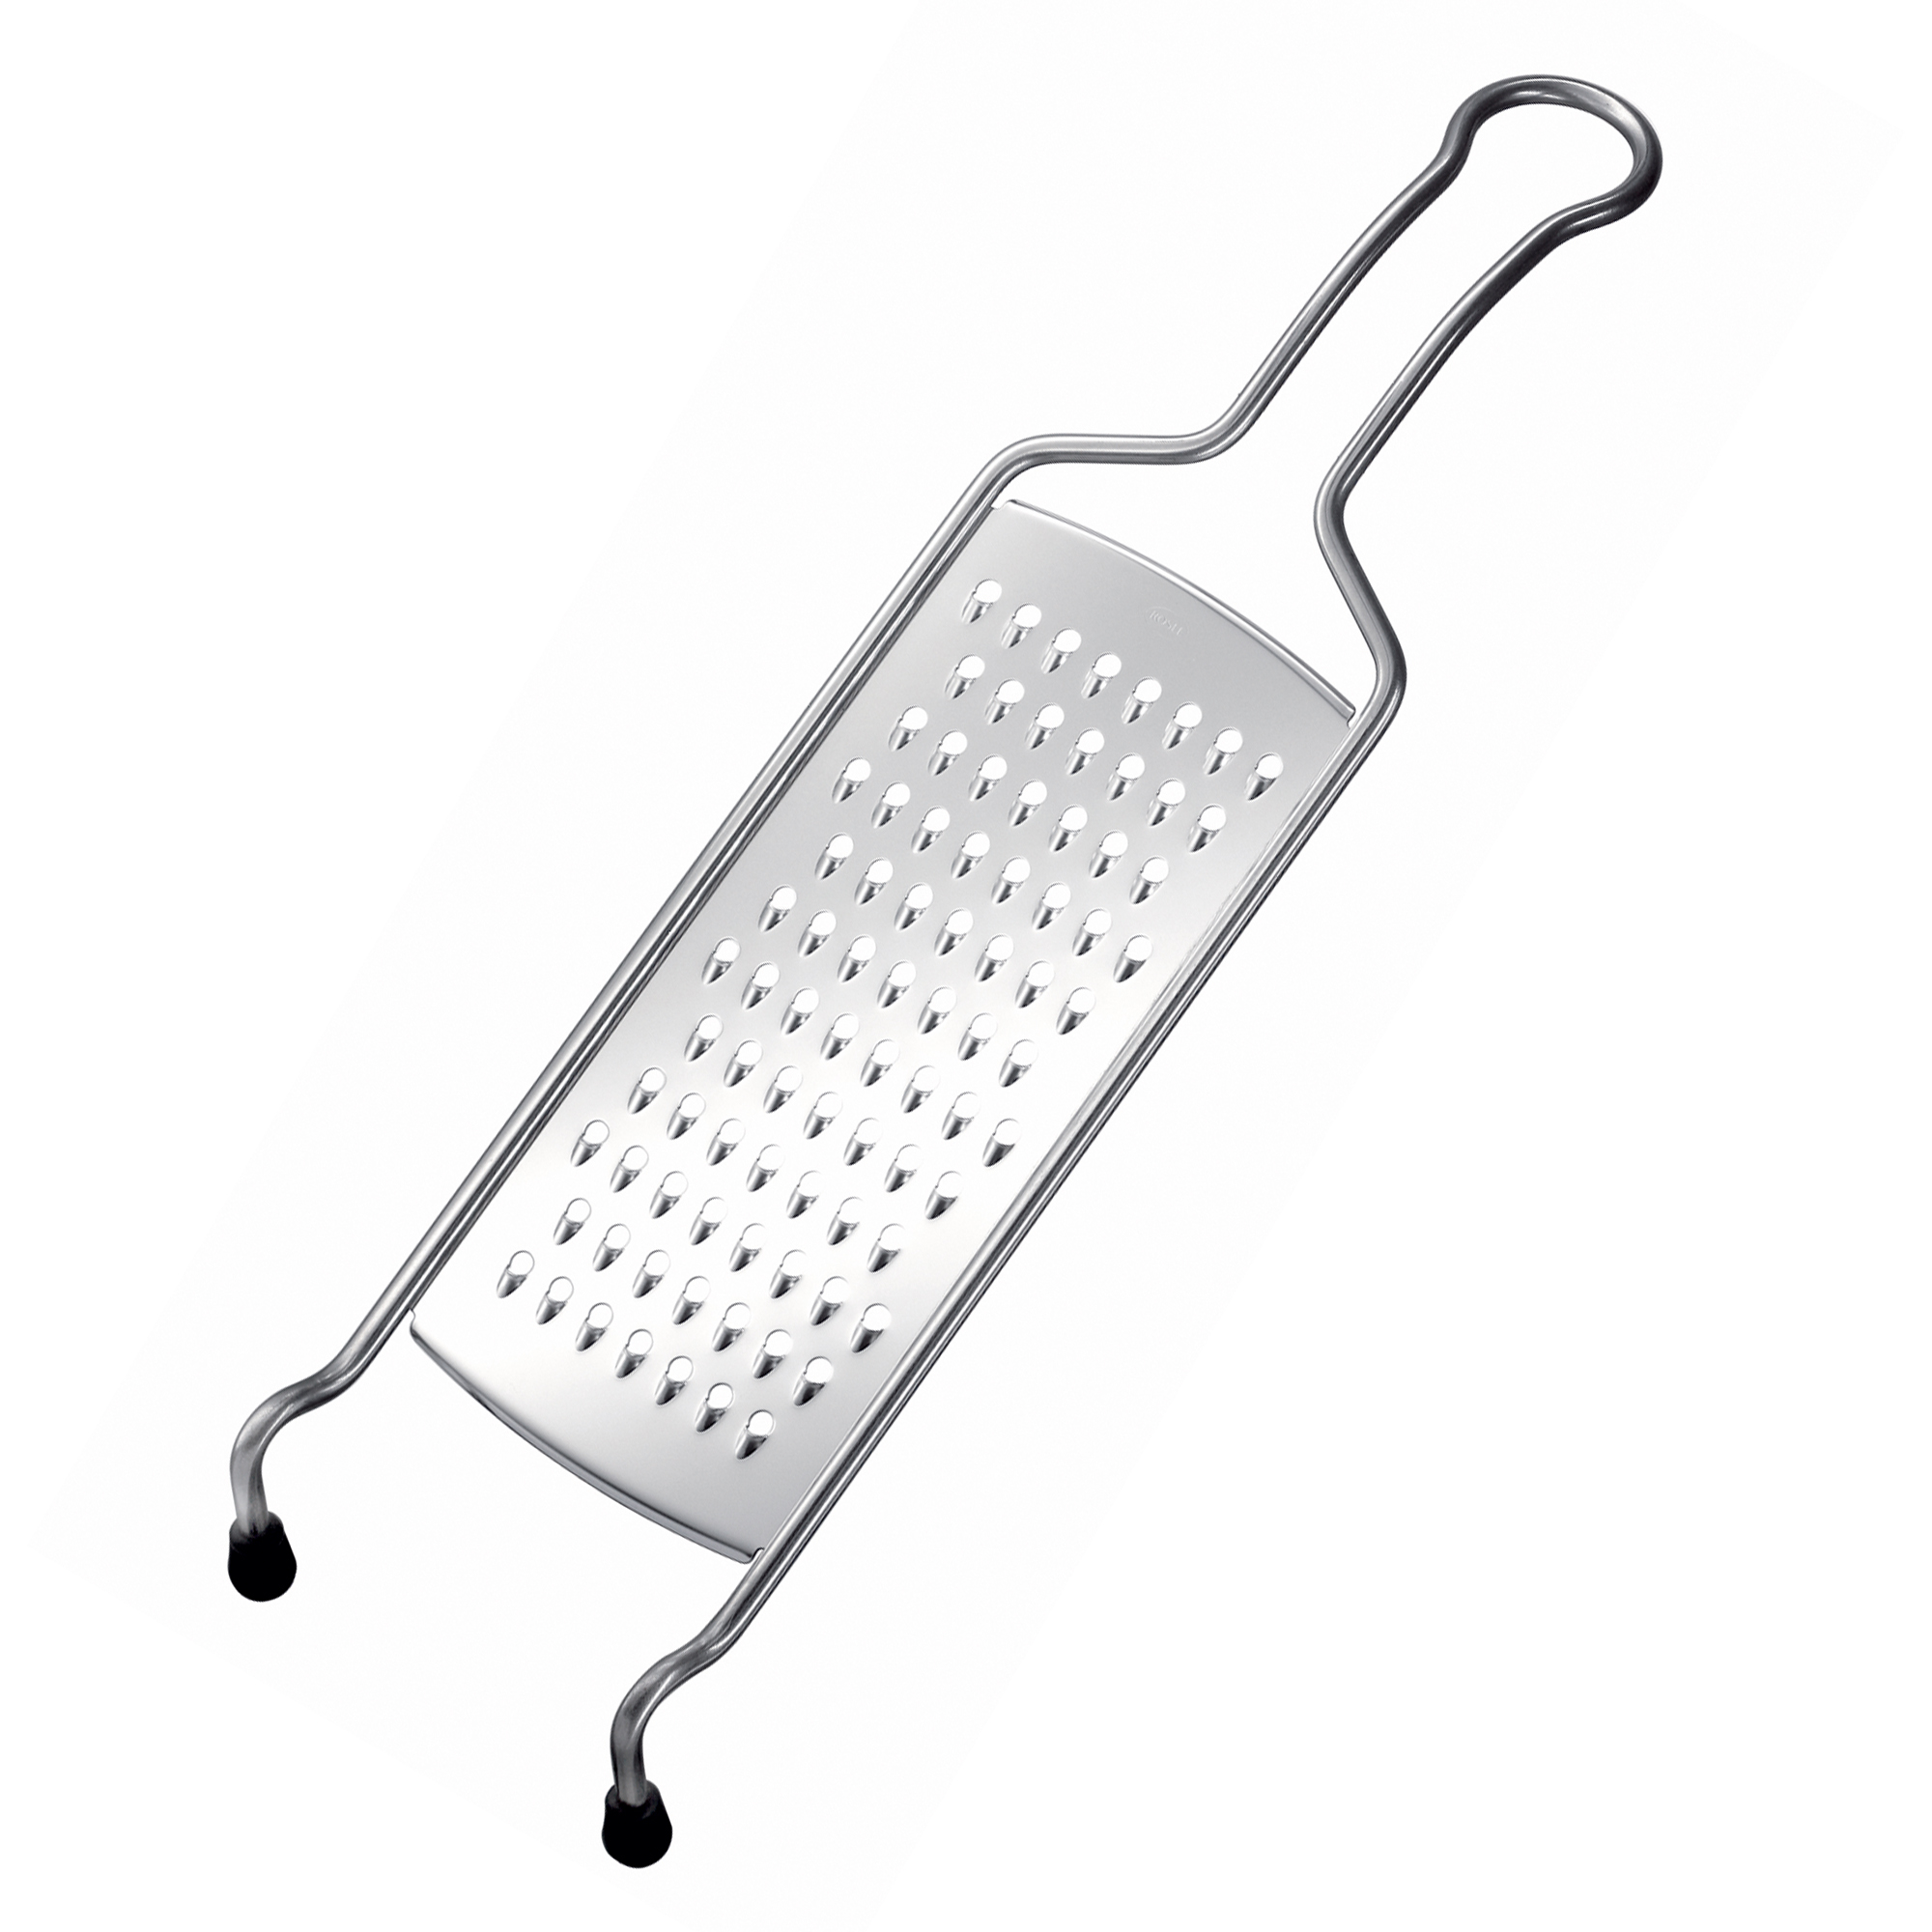 Rösle Stainless Steel Coarse Grater, Wire Handle, 15.9-inch 